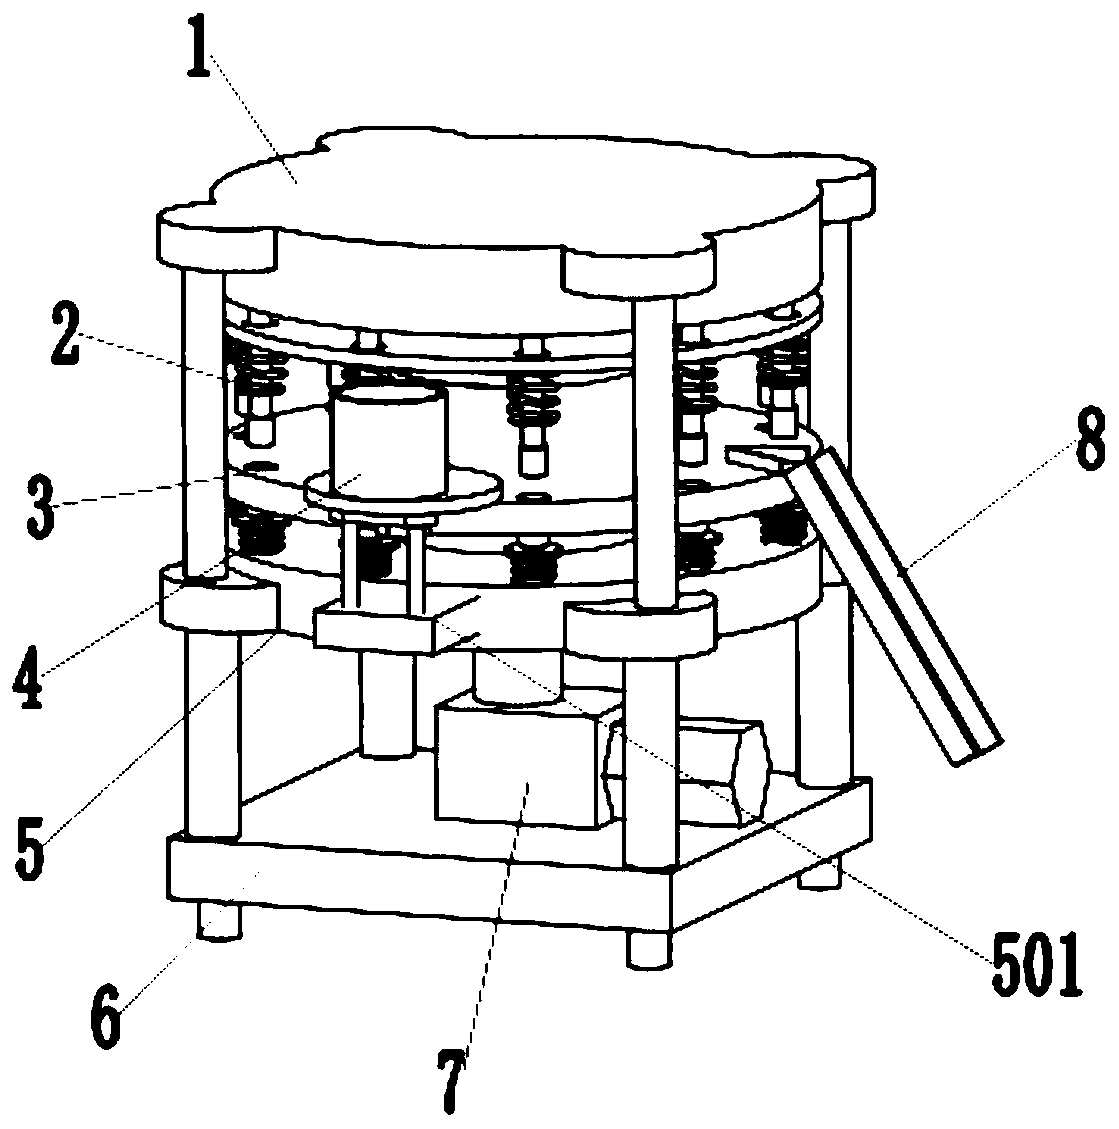 Tablet press for producing tablets